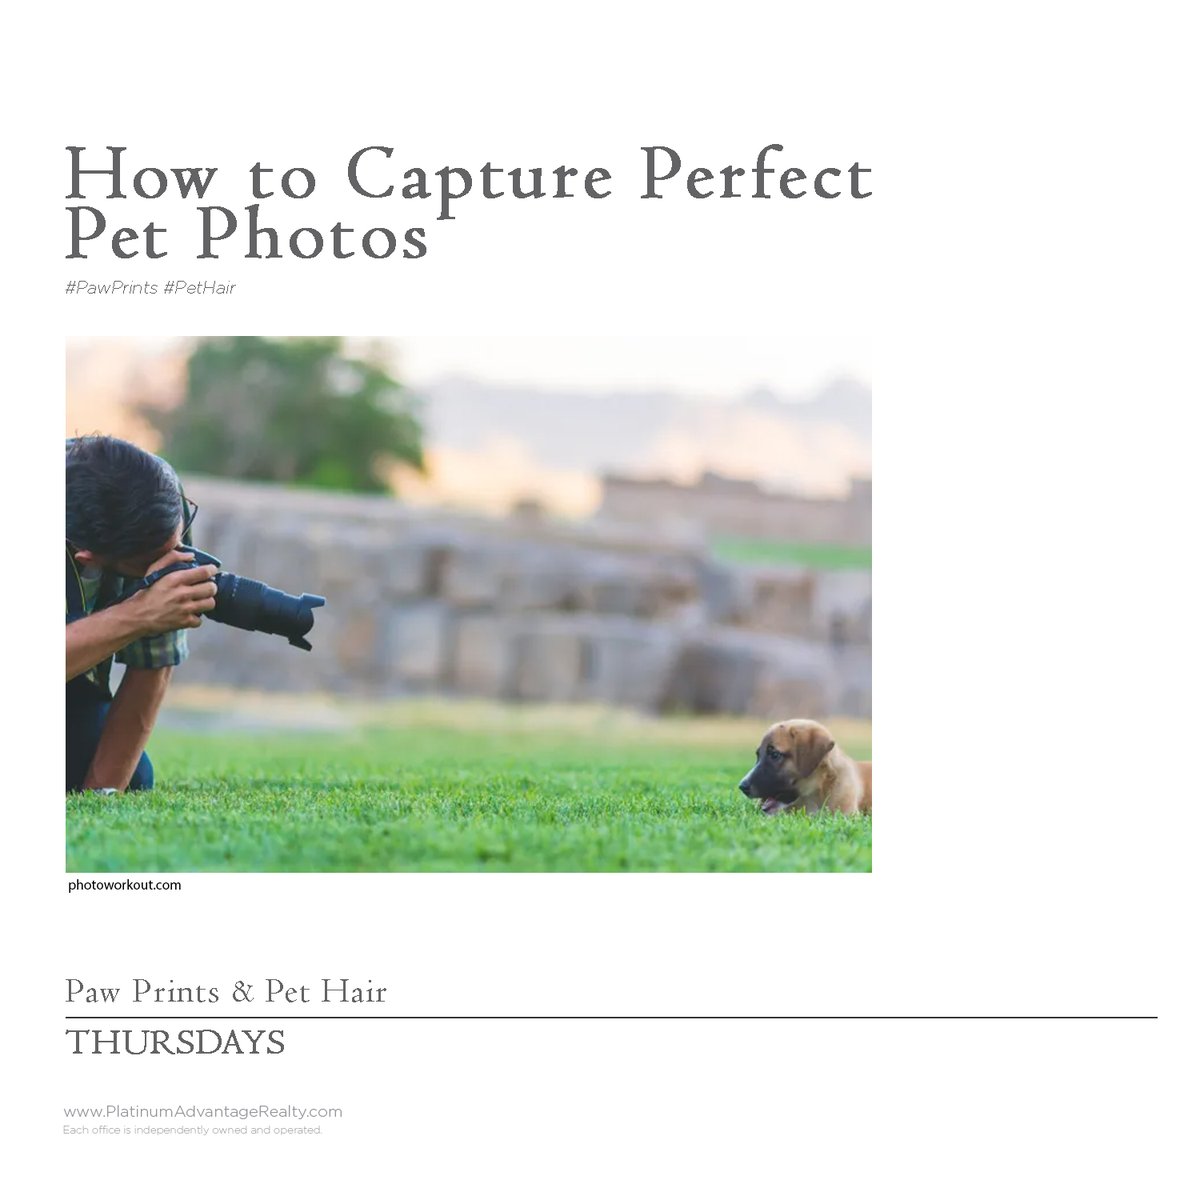 How to Capture Perfect Pet Photos

Pet photography can be daunting, but with a few handy tricks and a little bit of thoughtfulness, you can master it too and capture the perfect pet photo:  bit.ly/39pgpbW 

#PawPrintsPetHair #lukecares #fureverhomenotices #fureverhom ...